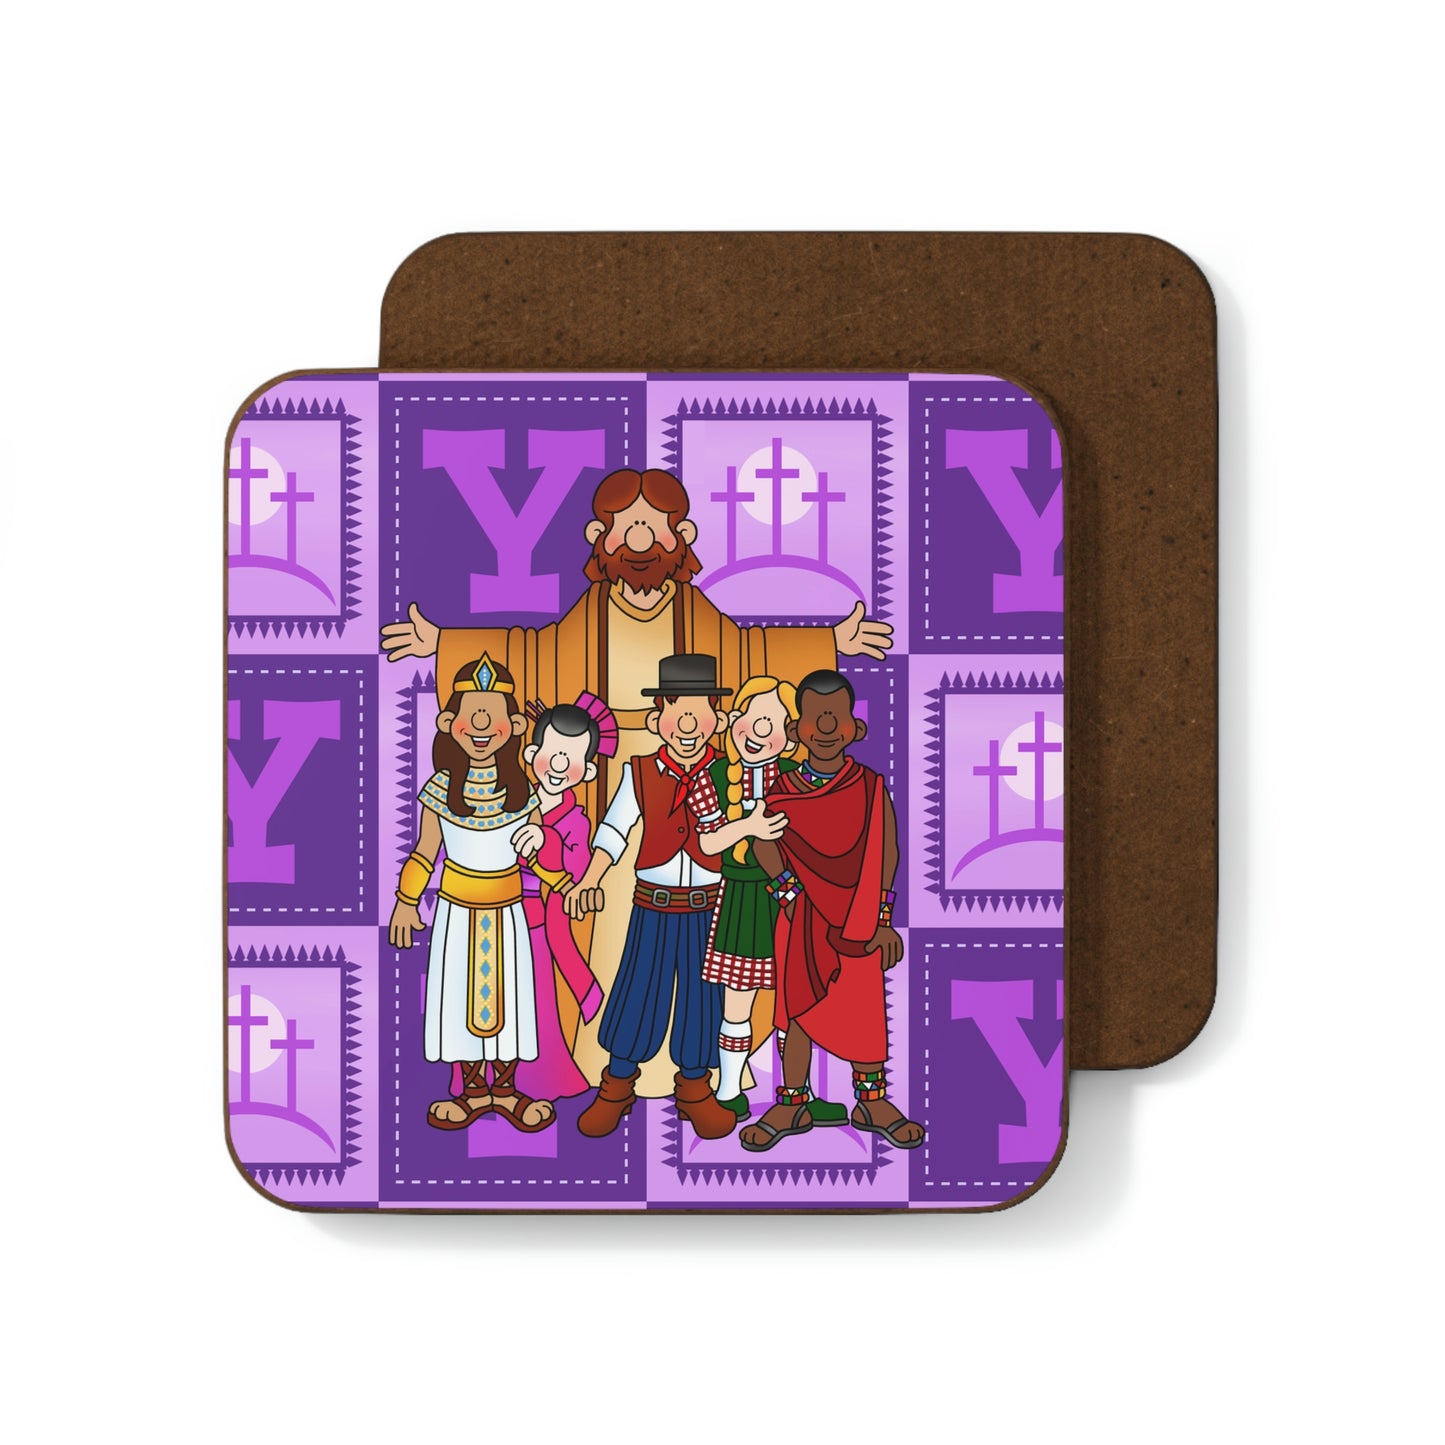 The Bible as Simple as ABC Y Hardboard Back Coaster